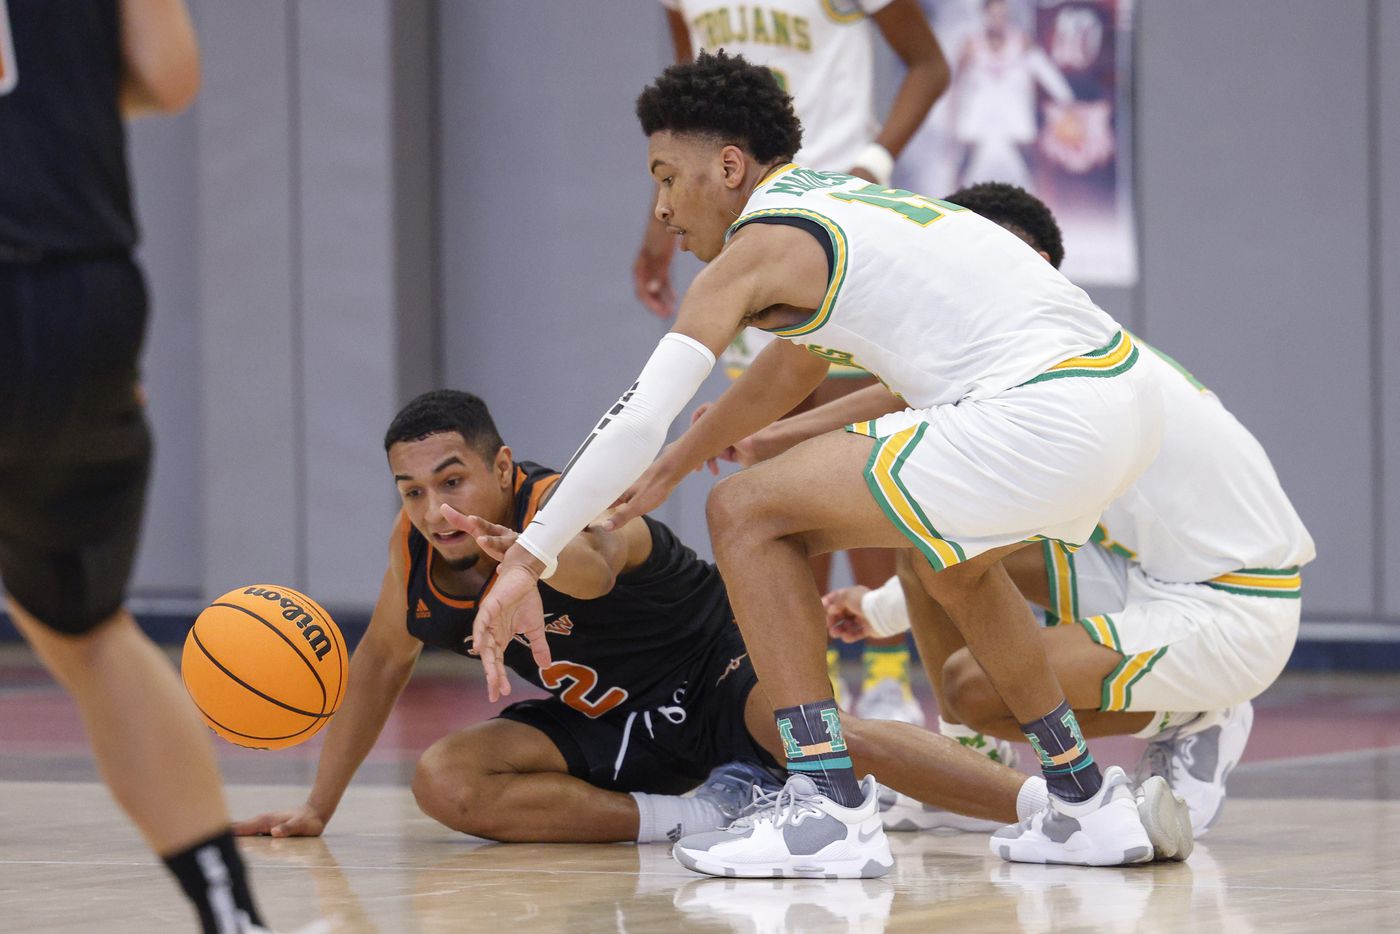 W.T. White guard Raul Nieves (2) and Madison forward Latrelle Wright (15) reach for a loose ball during the third quarter of a Dallas ISD Holiday Invitational basketball tournament game at Woodrow Wilson High School in Dallas, Tuesday, Dec. 28, 2021.